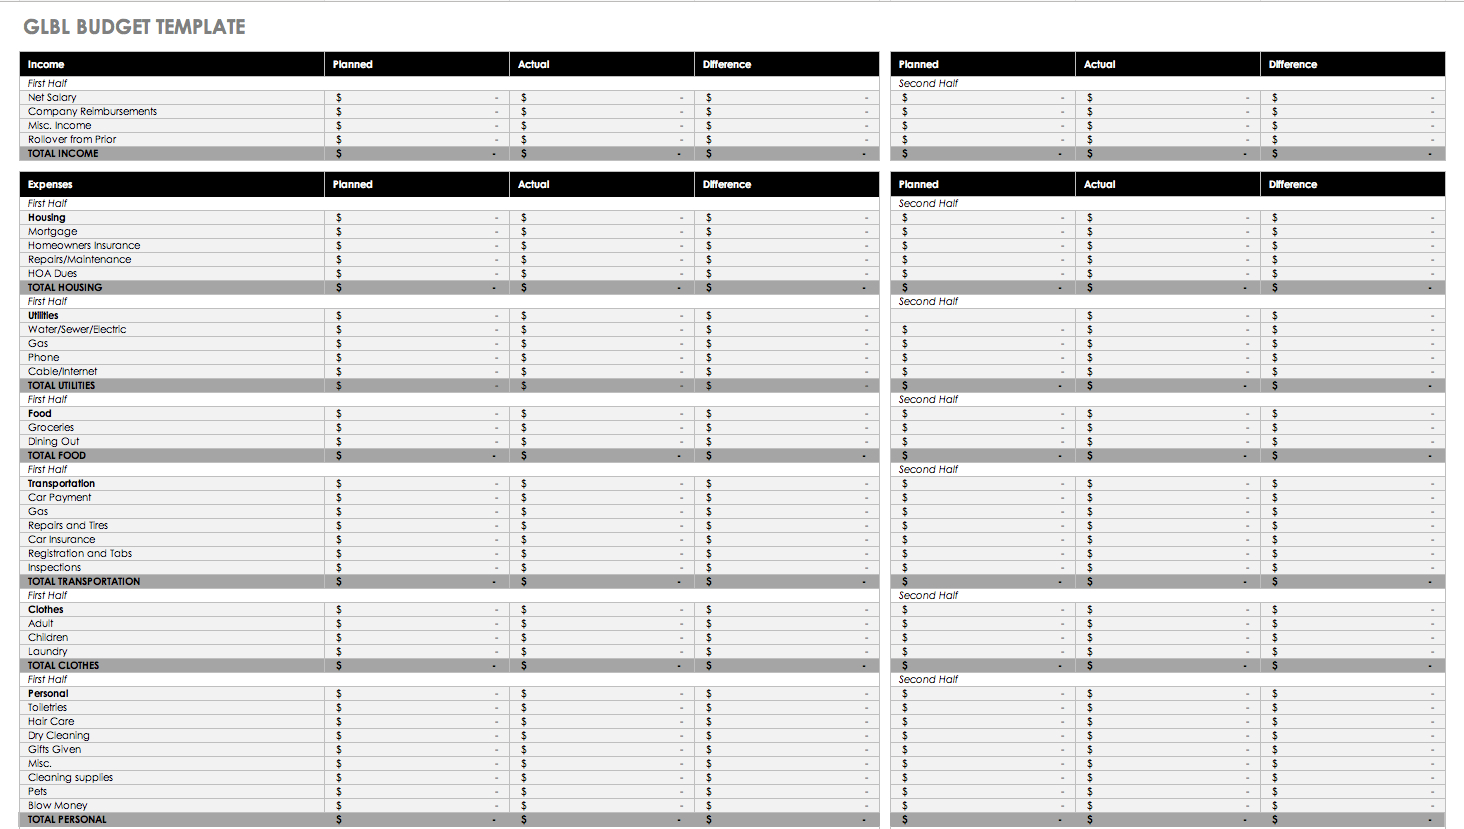 Hoa Budget Spreadsheet throughout Free Budget Templates In Excel For